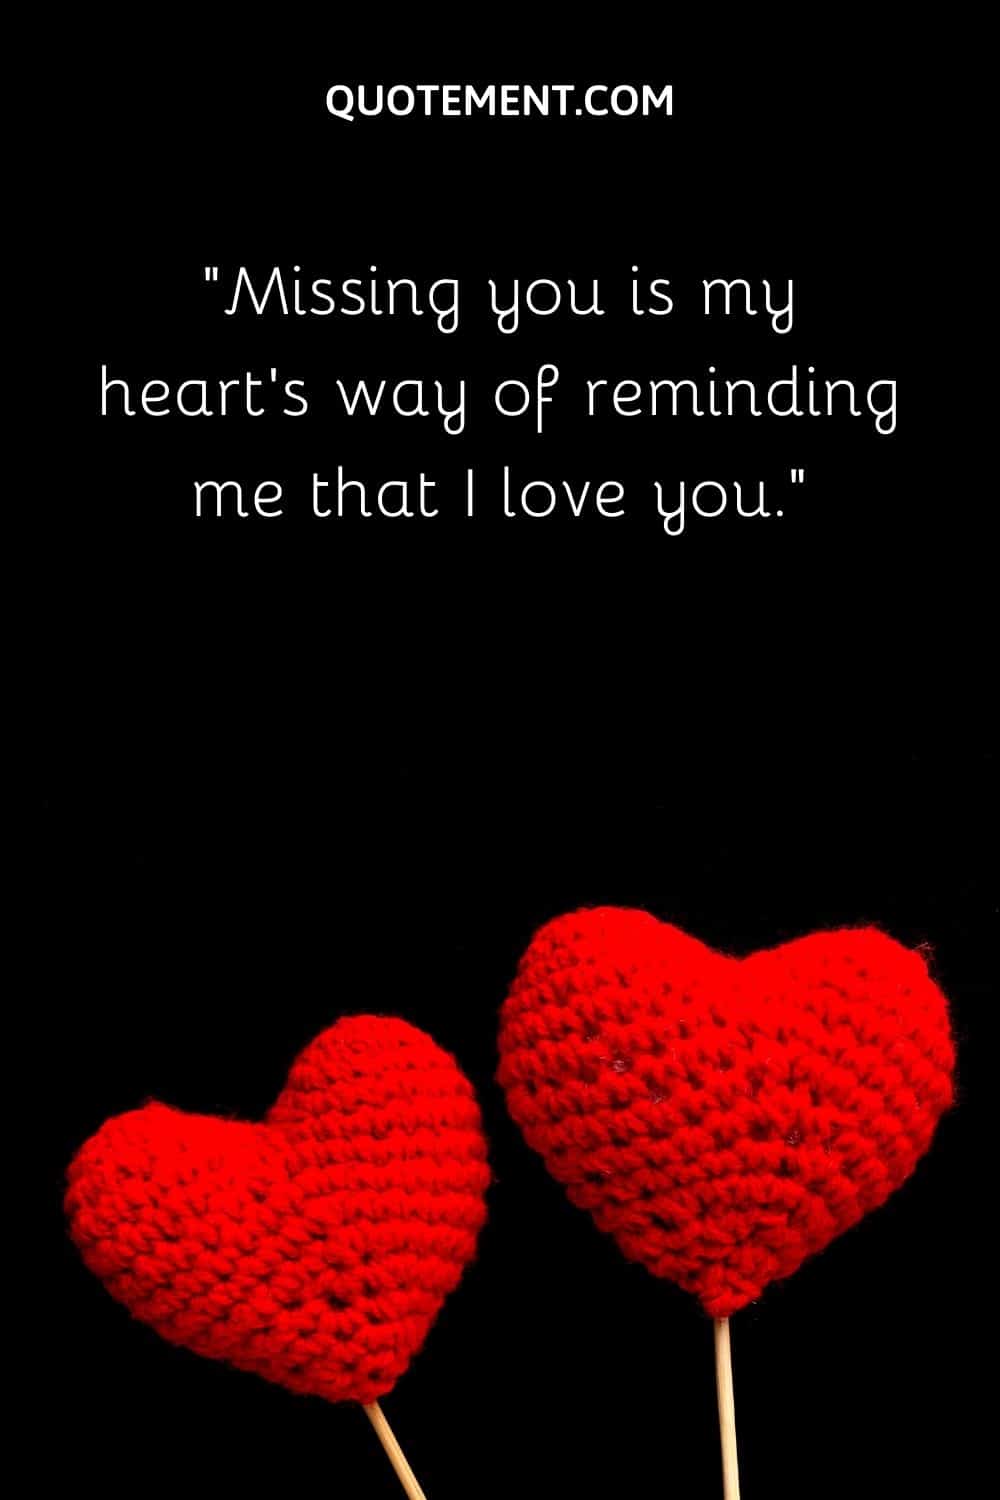 Missing you is my heart's way of reminding me that I love you.